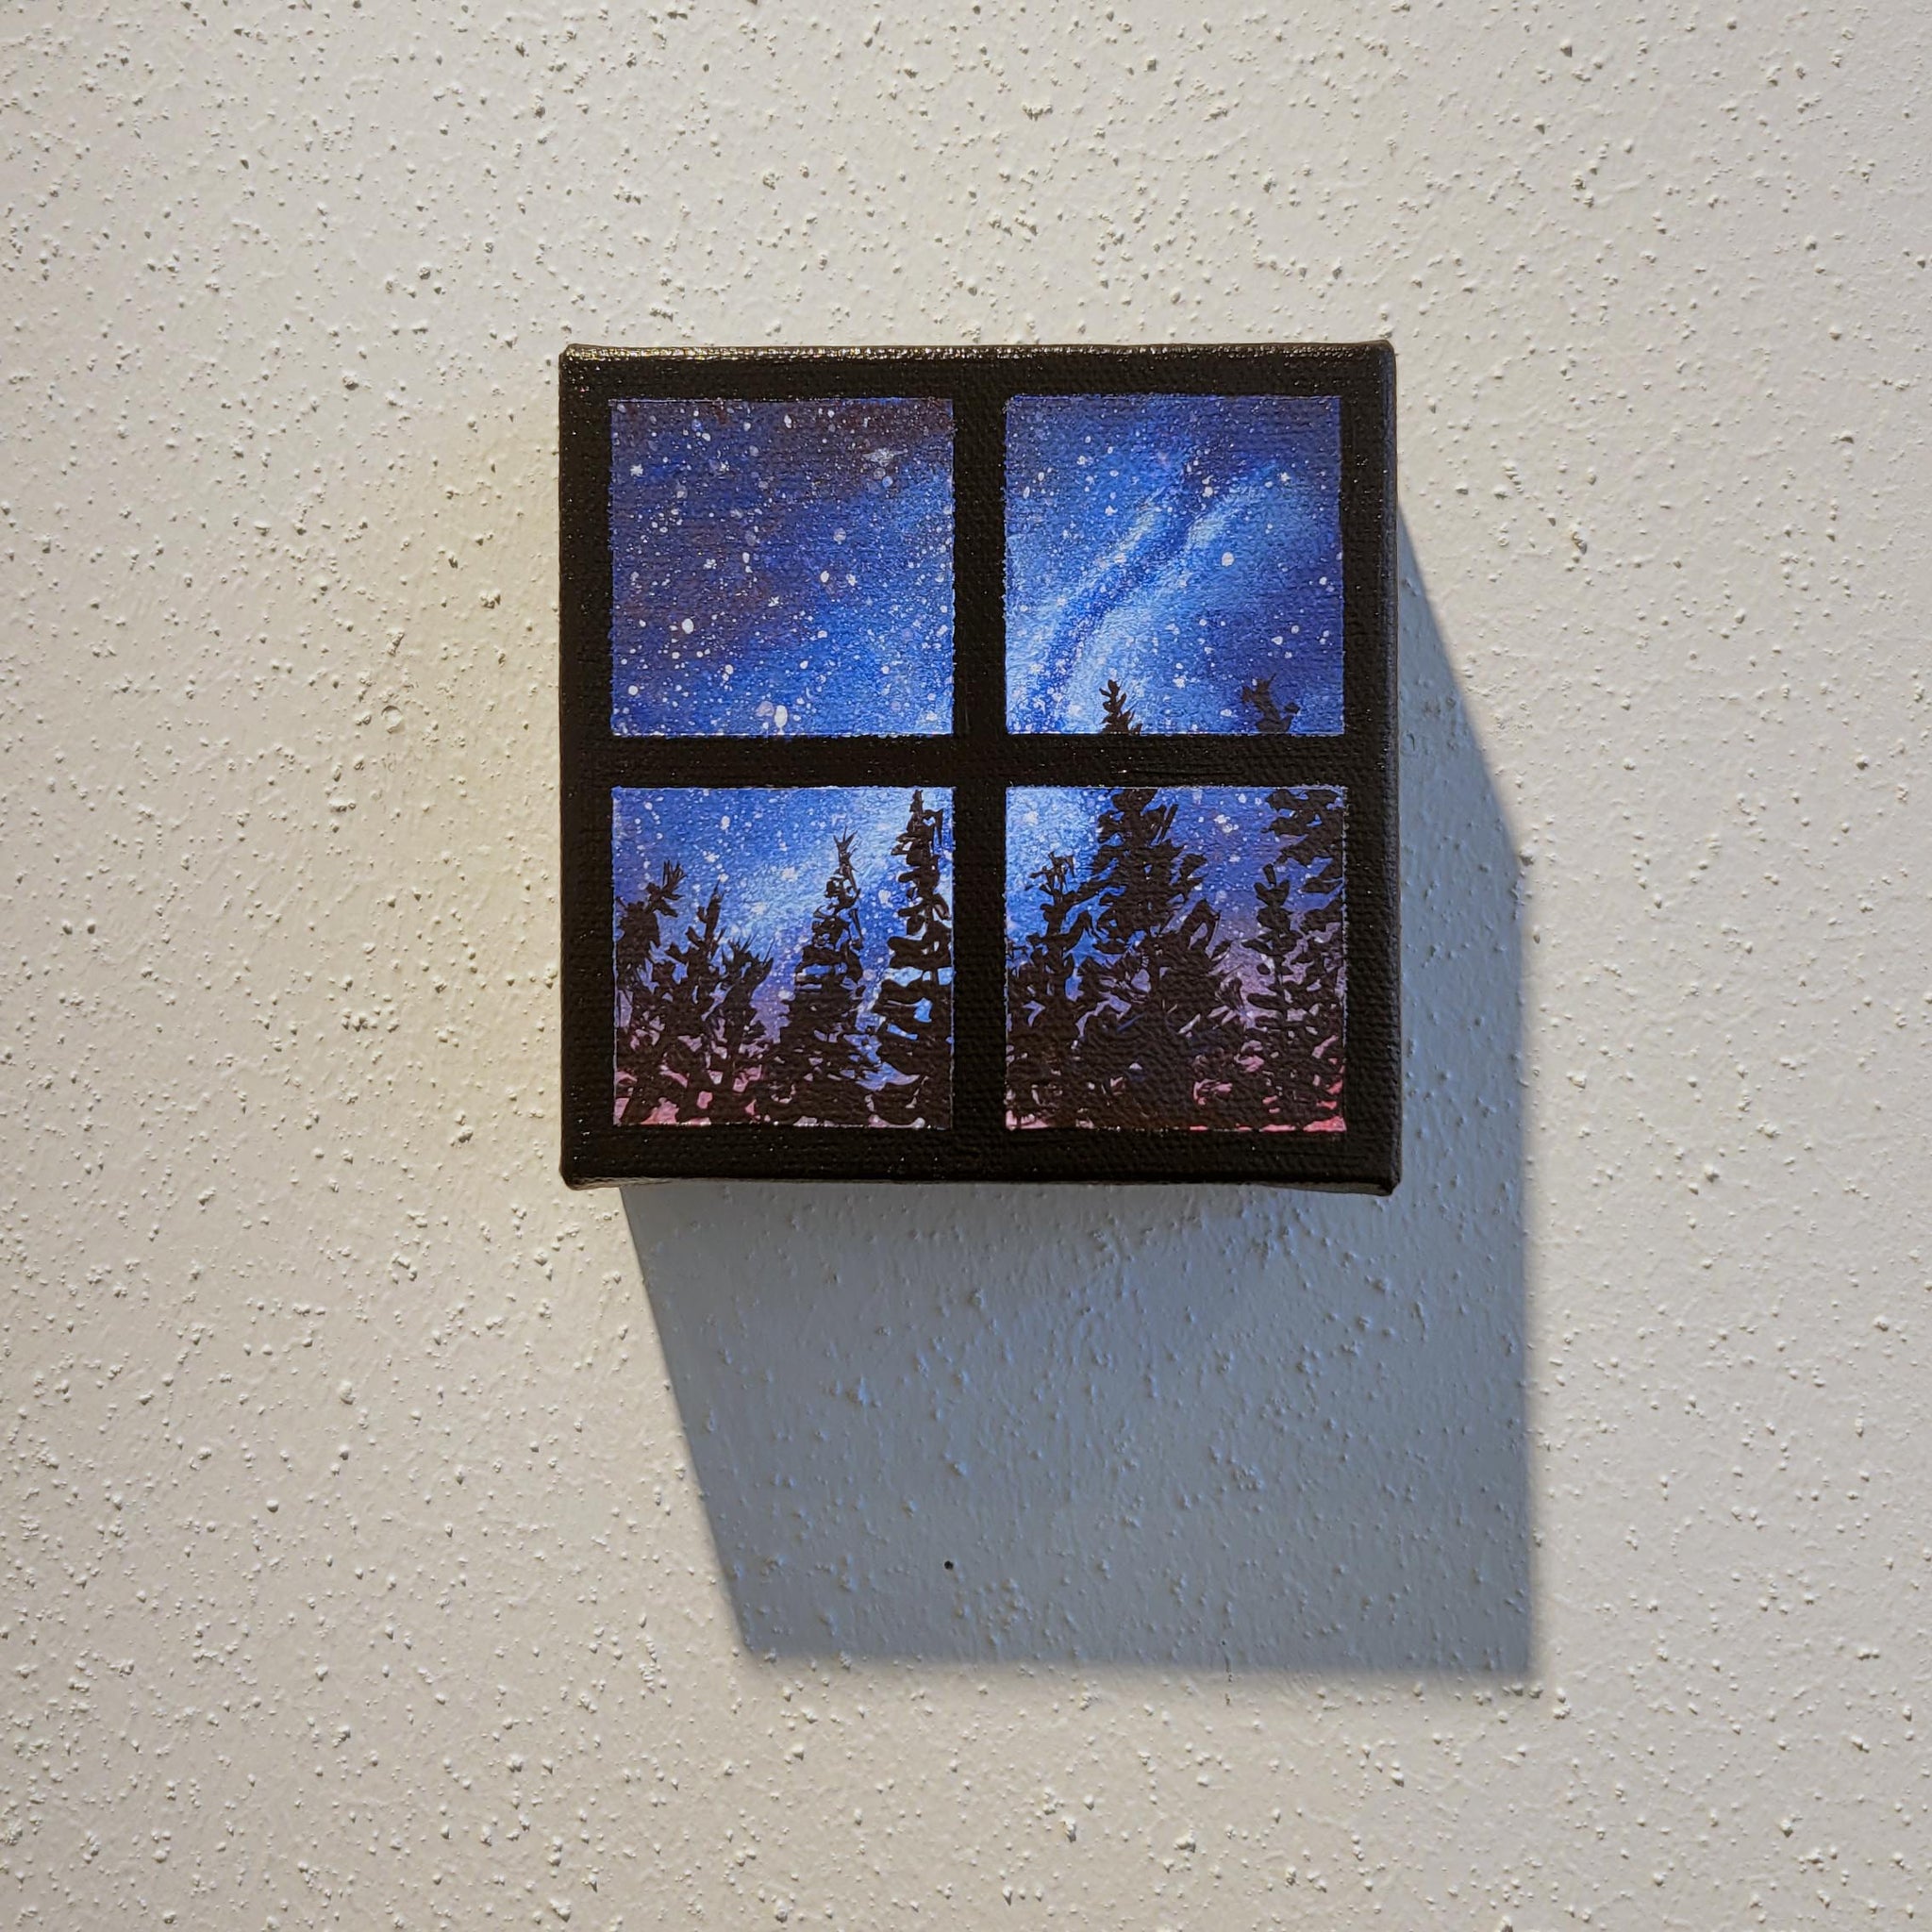 Small Windows: Night Sky Above the Forest